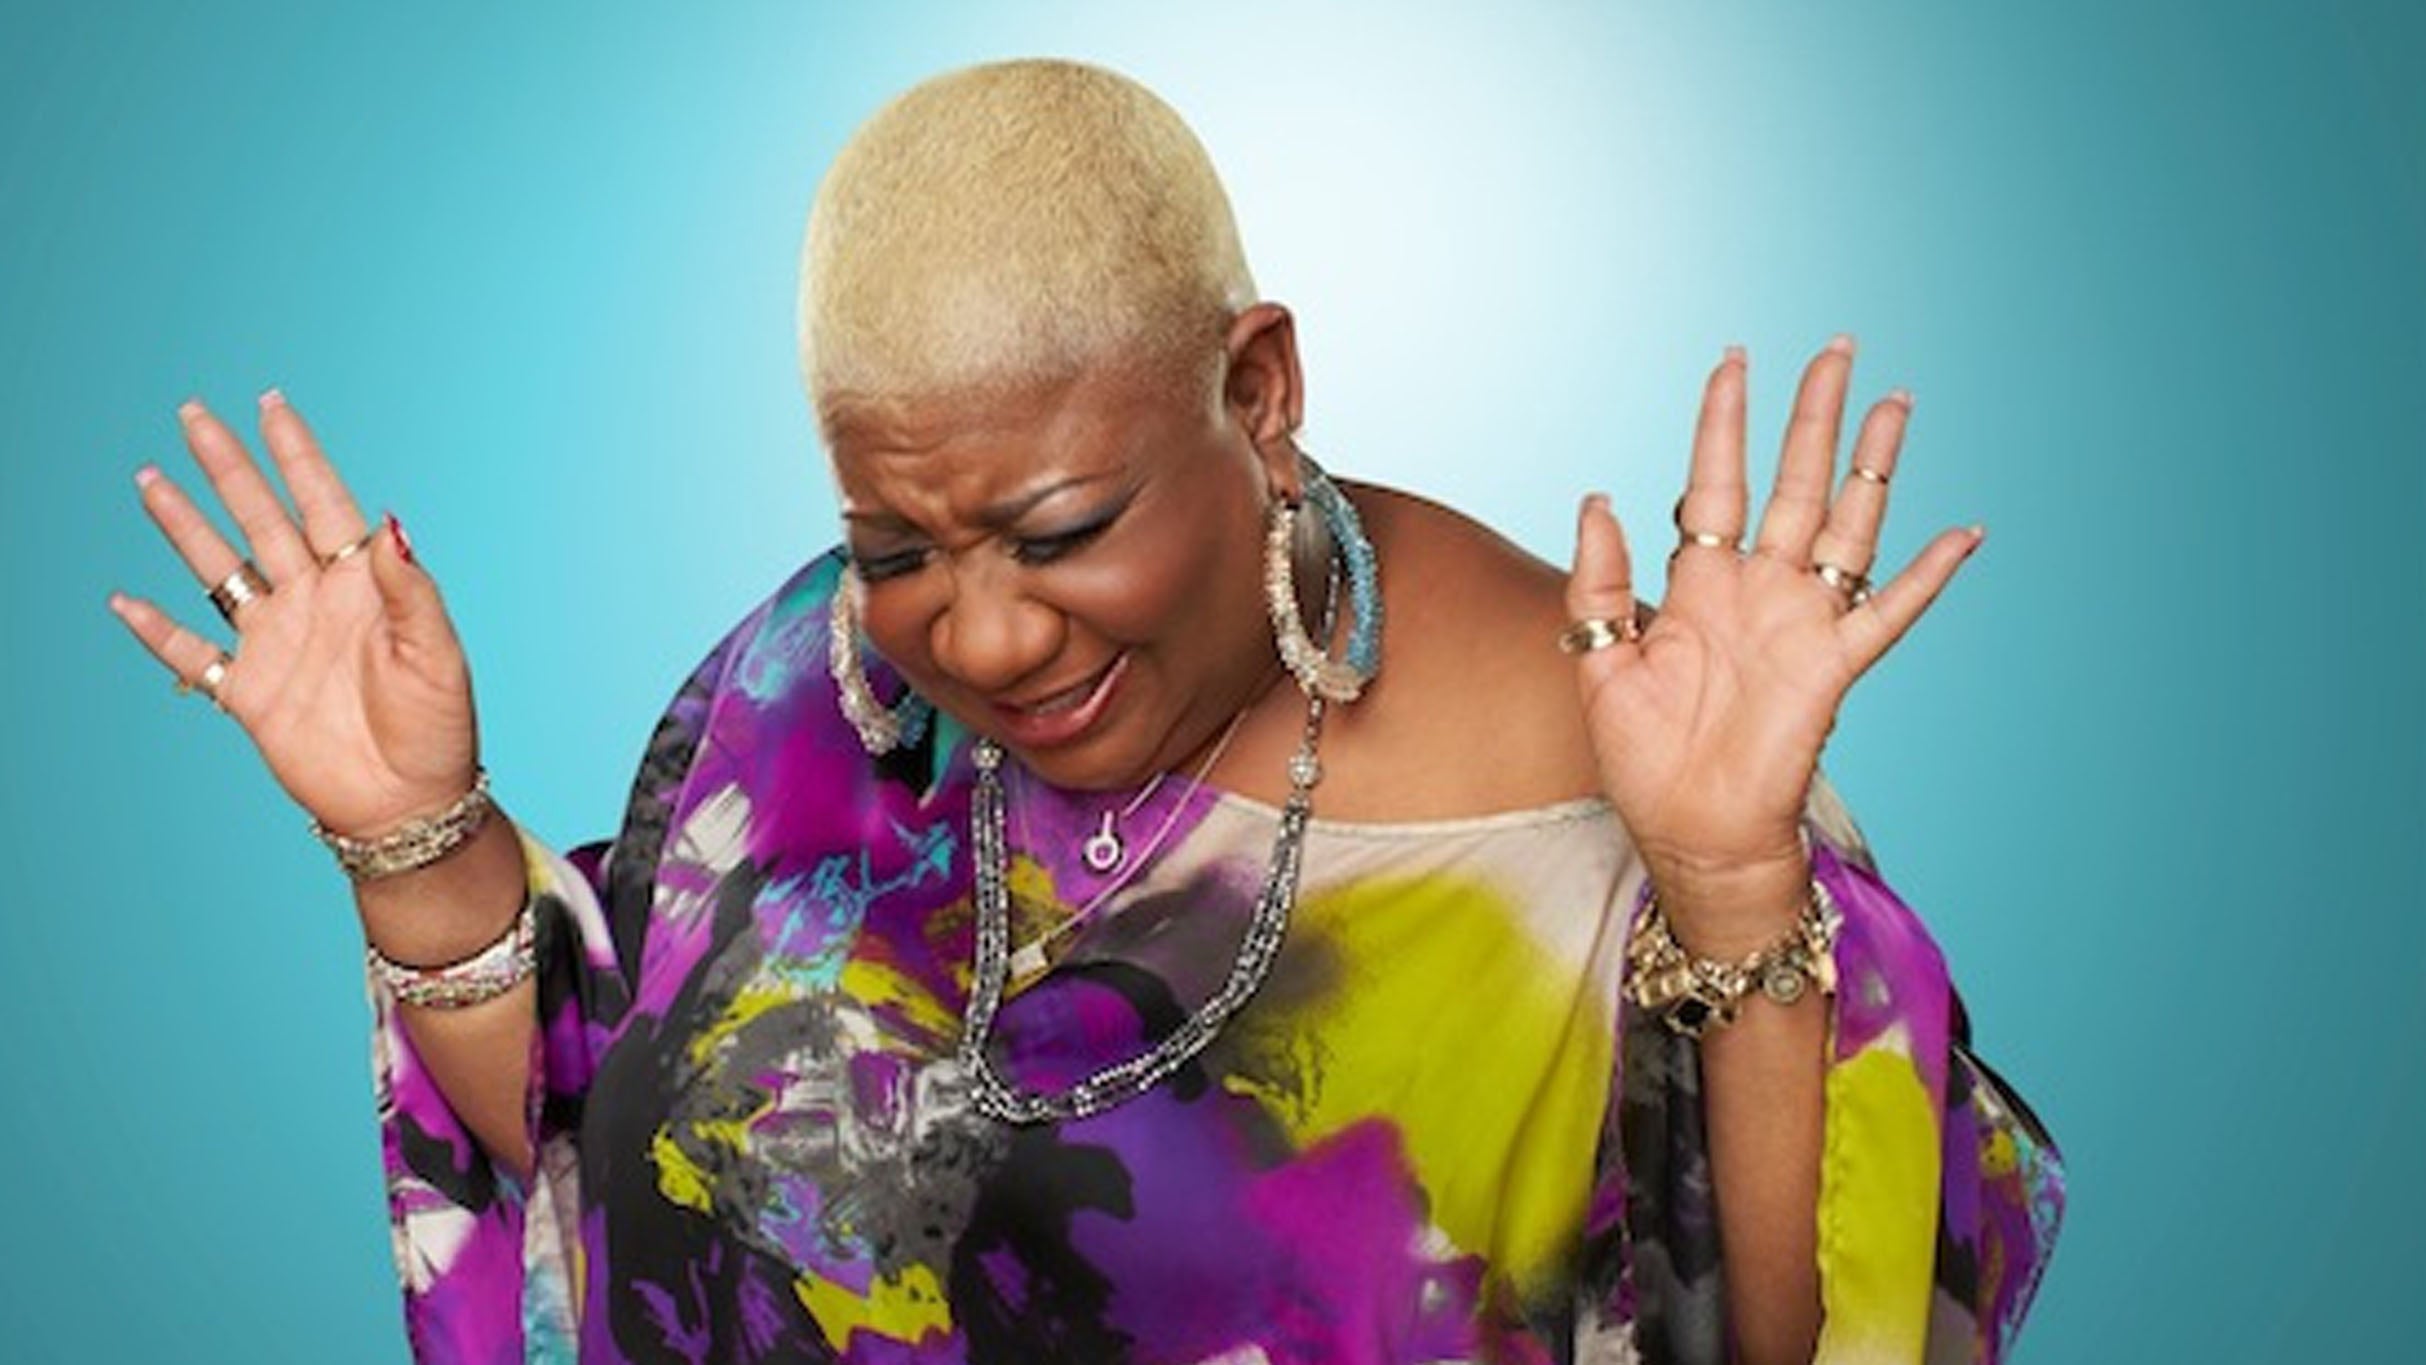 Luenell wsg Finesse Mitchell Comedy Night Out